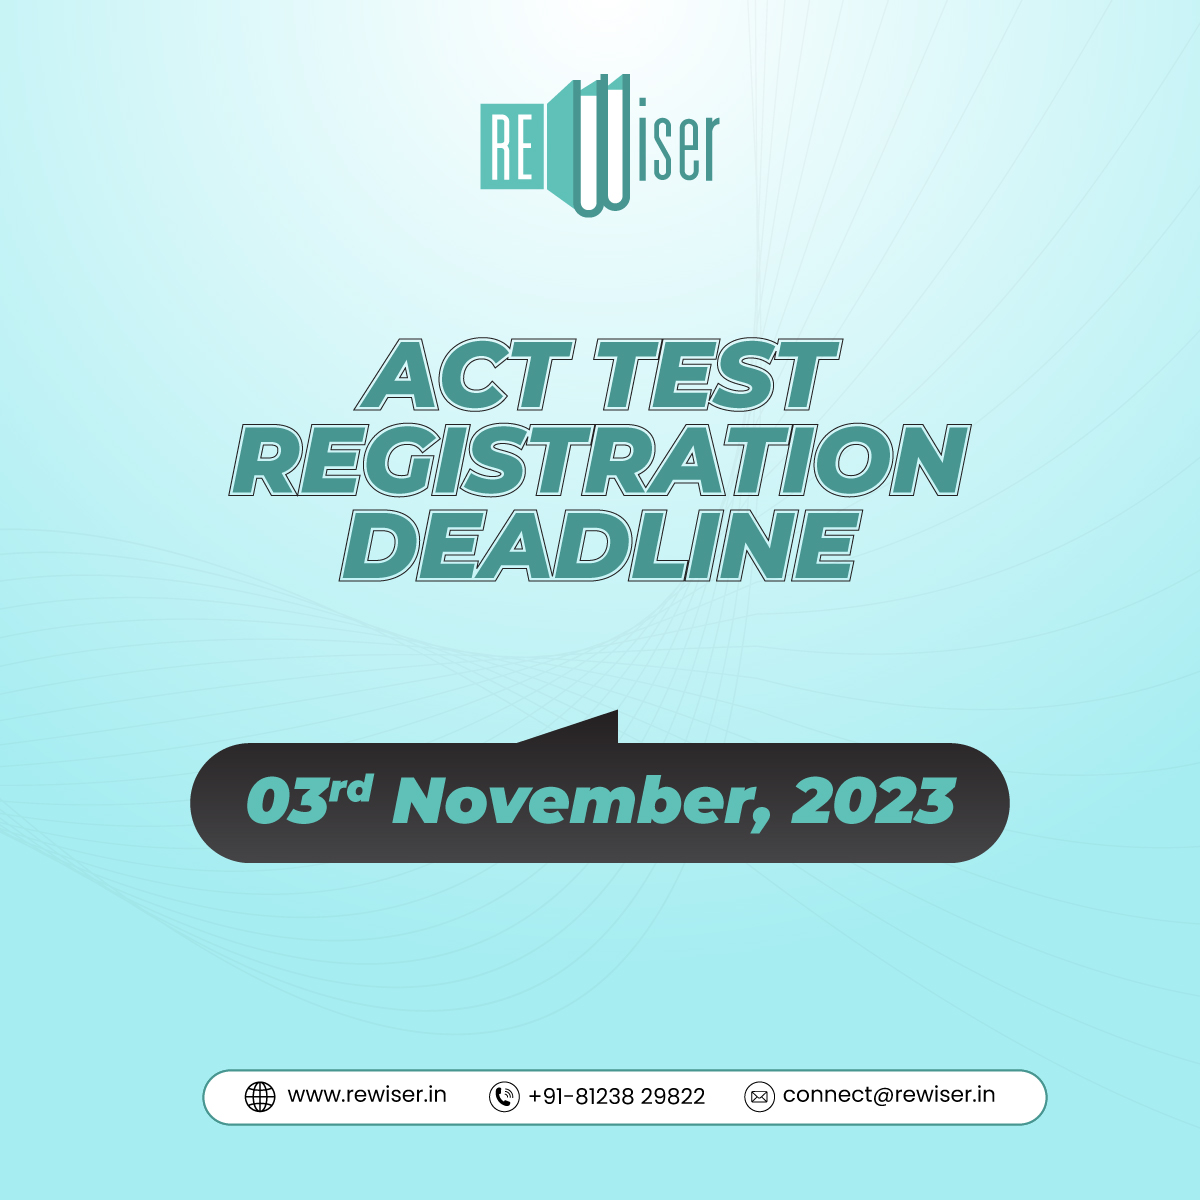 Attention students📢! Only a few hours left for the 𝐀𝐂𝐓 𝐓𝐞𝐬𝐭 𝐑𝐞𝐠𝐢𝐬𝐭𝐫𝐚𝐭𝐢𝐨𝐧. Deadline: 3rd November. Don't miss this crucial date on your academic calendar. Mark it, register, and take a stride forward in your educational journey!

#rewiser #acttest #acttestprep